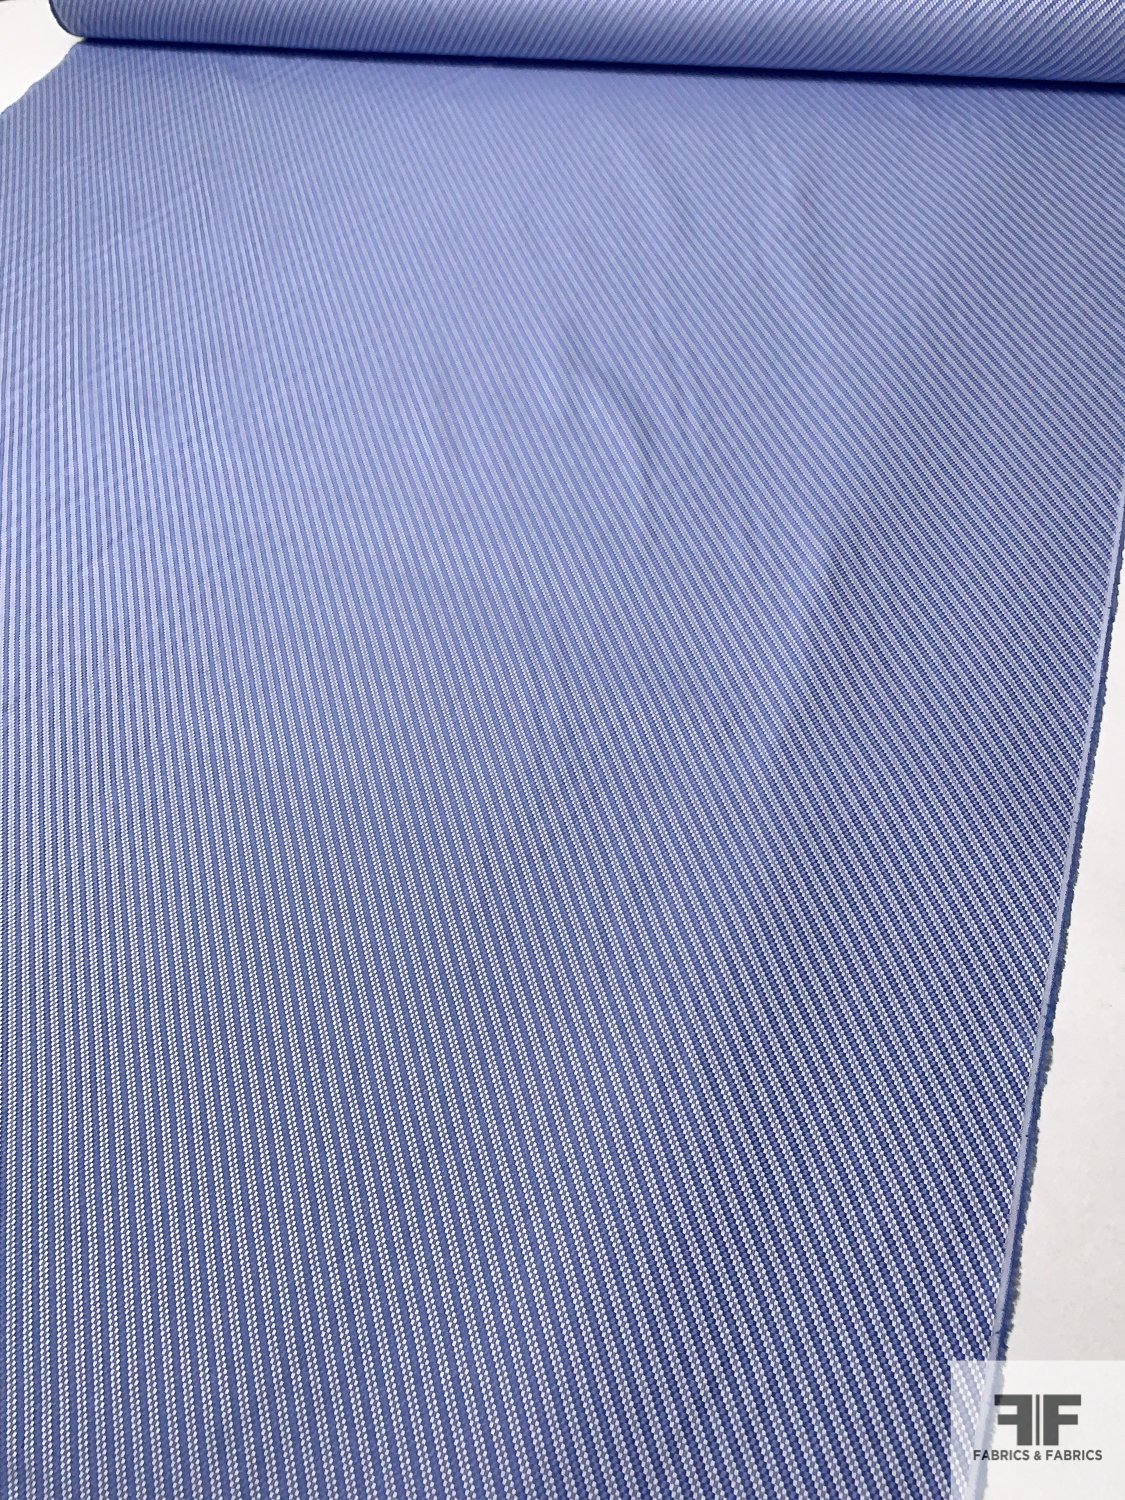 Made in Japan Finely Woven Diagonal Striped Cotton Shirting - Periwinkle Blue / White